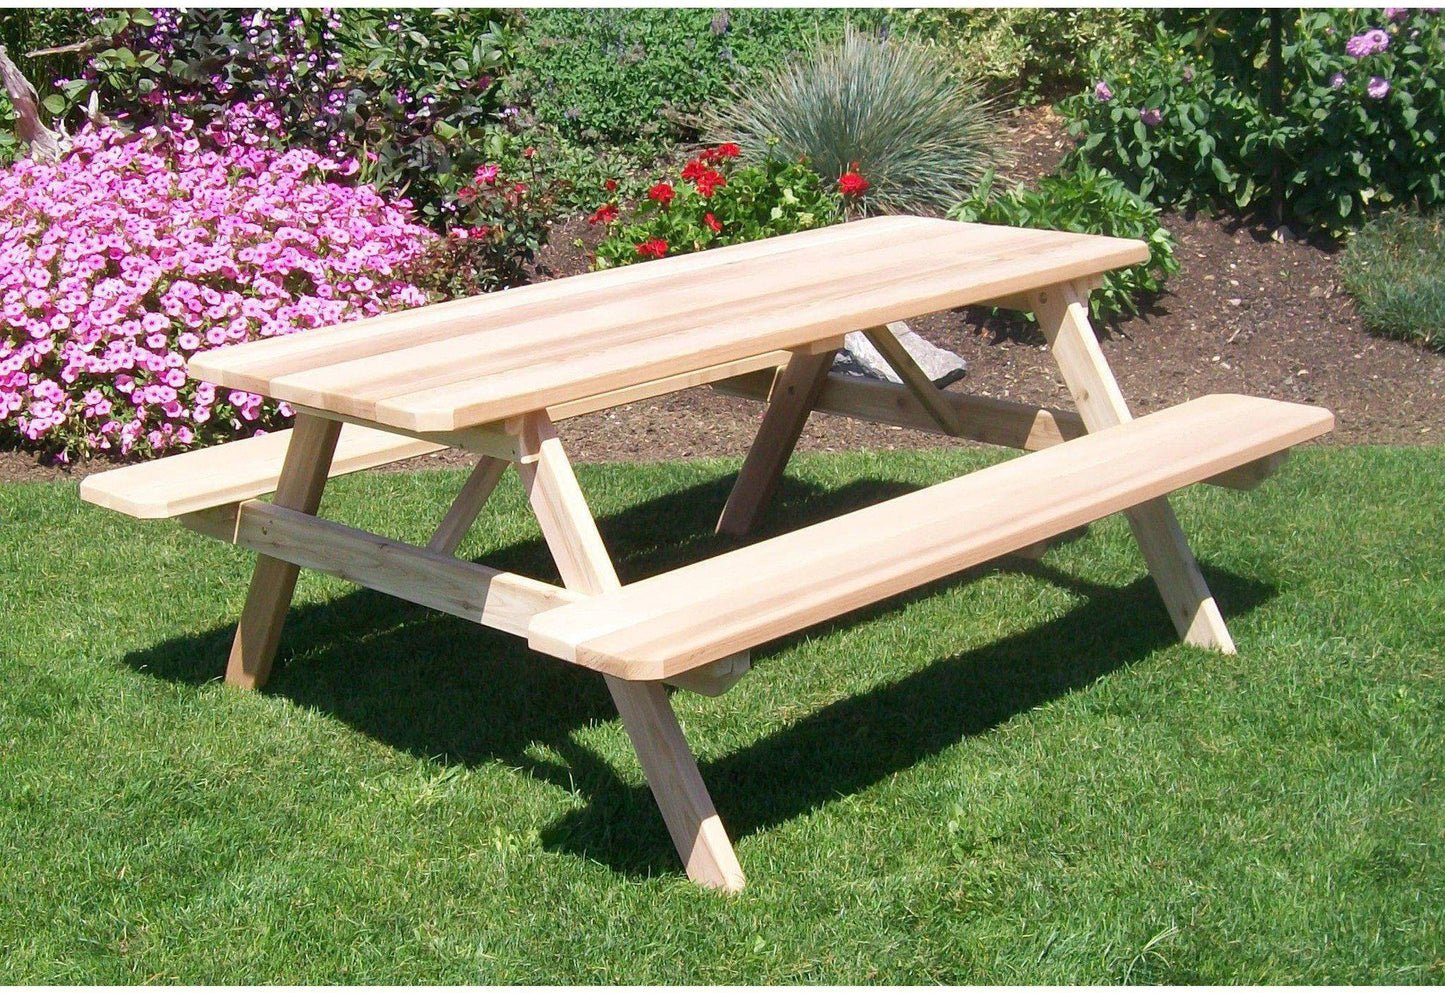 A & L FURNITURE CO. Western Red Cedar 4' Table w/Attached Benches - Specify for FREE 2" Umbrella Hole  - Ships FREE in 5-7 Business days - Rocking Furniture